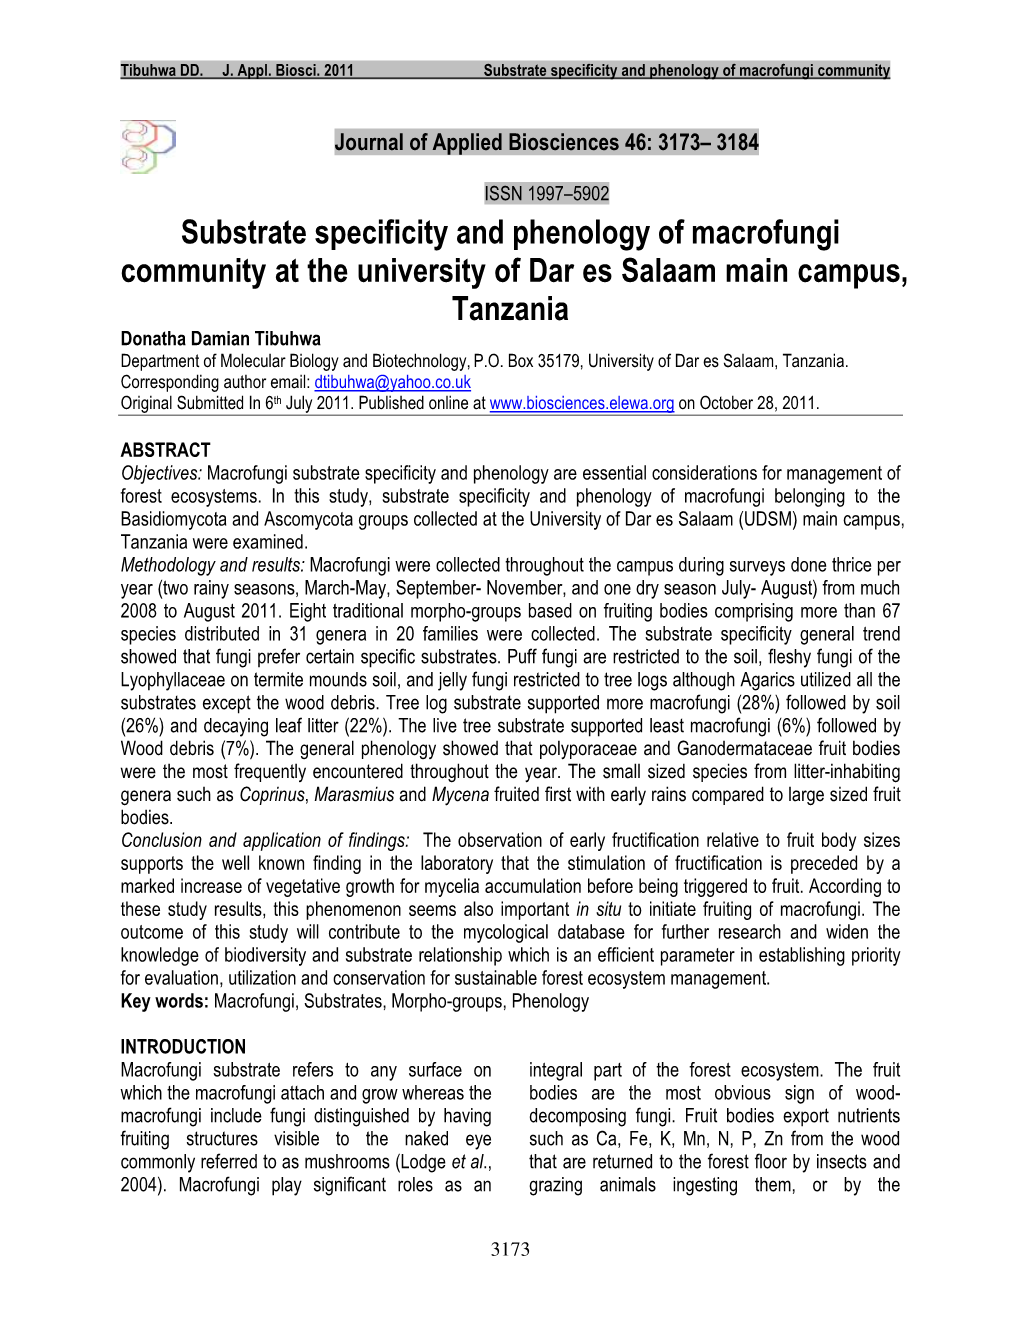 Substrate Specificity and Phenology of Macrofungi Community at The